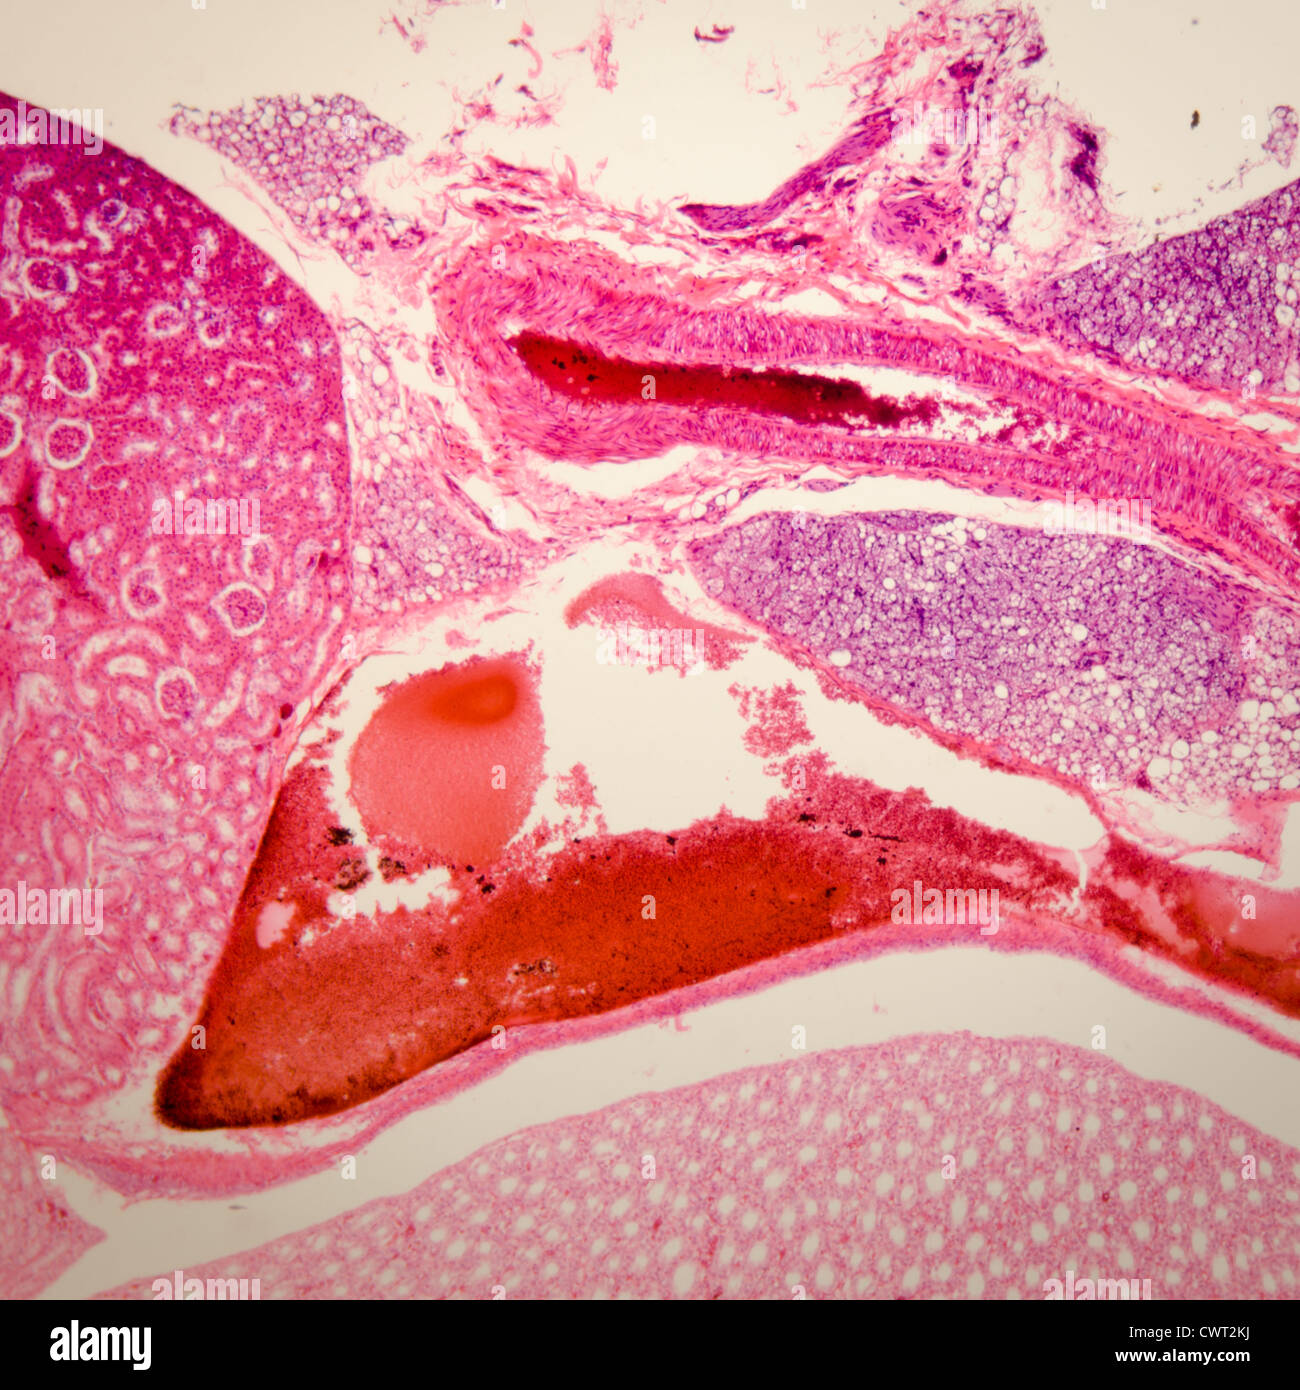 Medical science anthropotomy article microscopique physiologie du tissu rénal background Banque D'Images